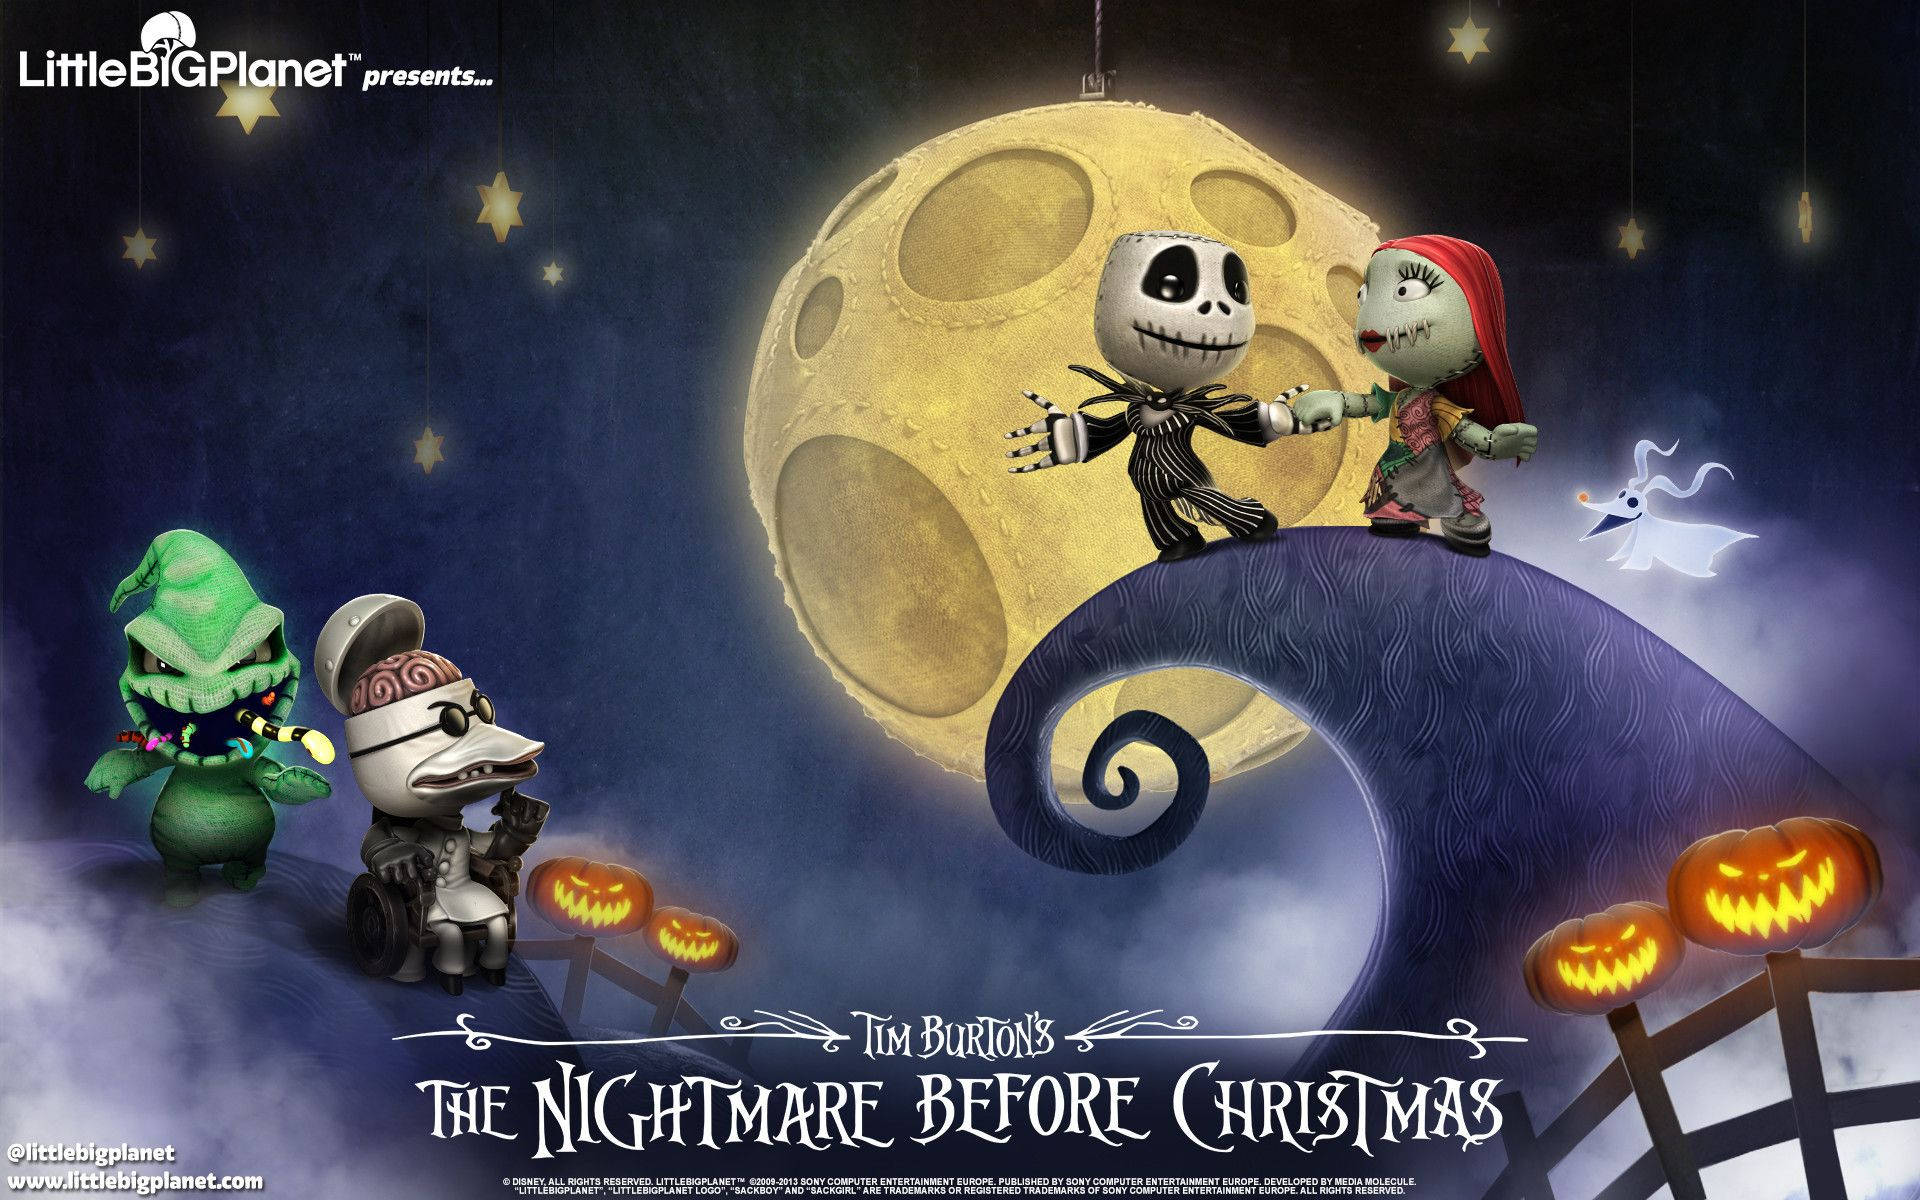 Join Jack Skellington, Zero and the gang for an unforgettable adventure! Wallpaper